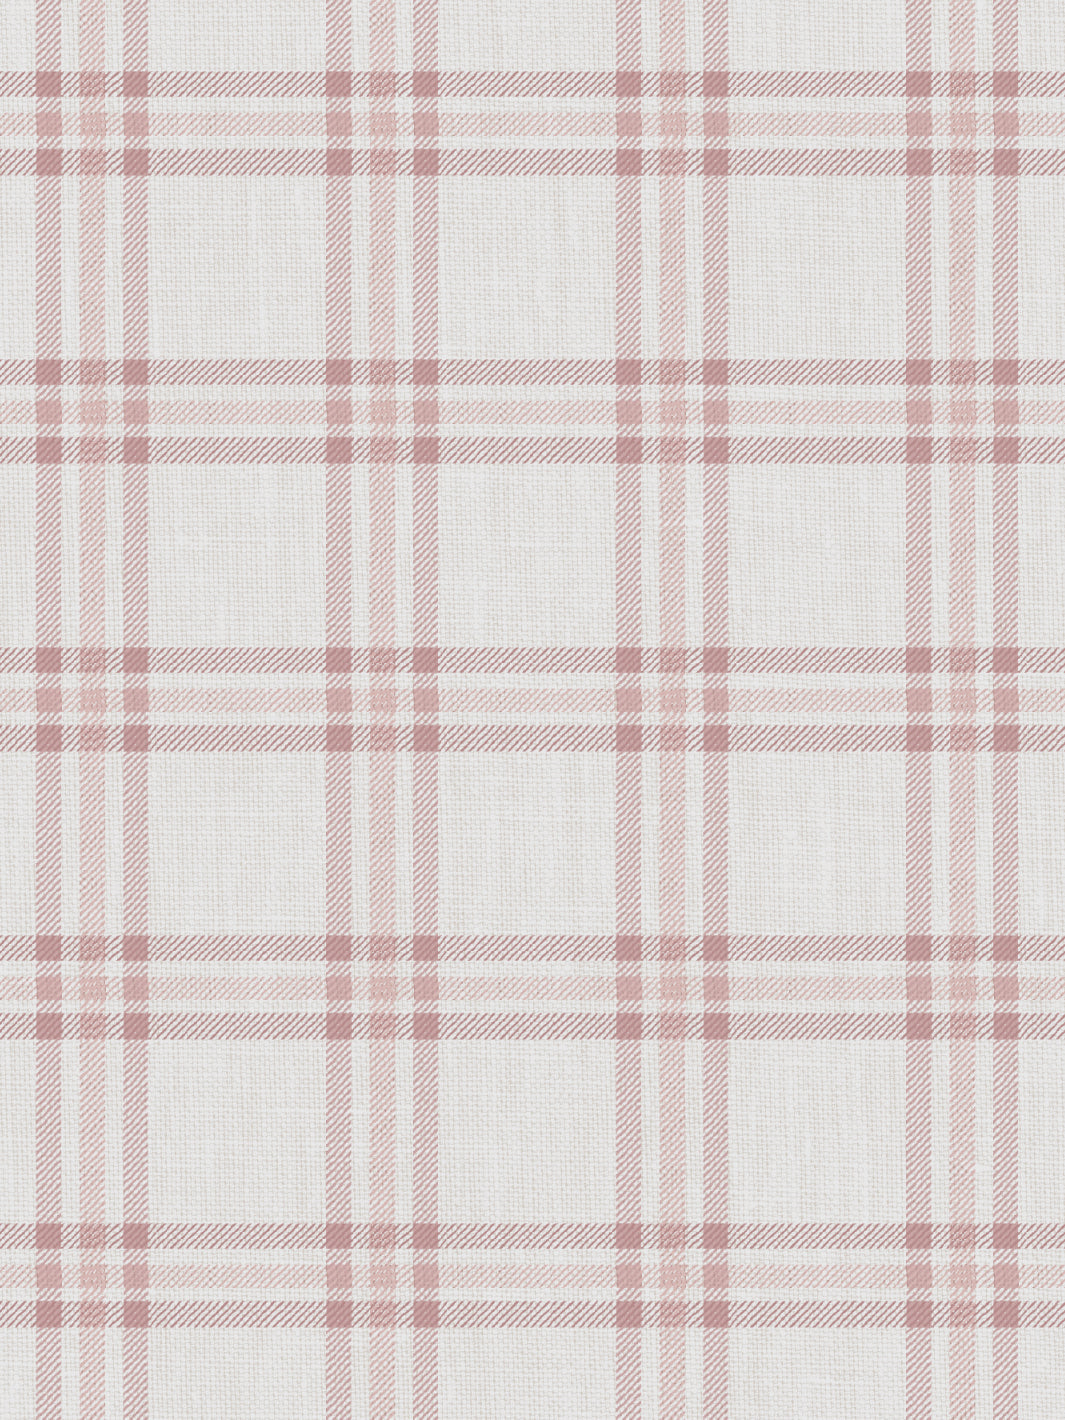 'Rogers Plaid' Wallpaper by Nathan Turner - Pink